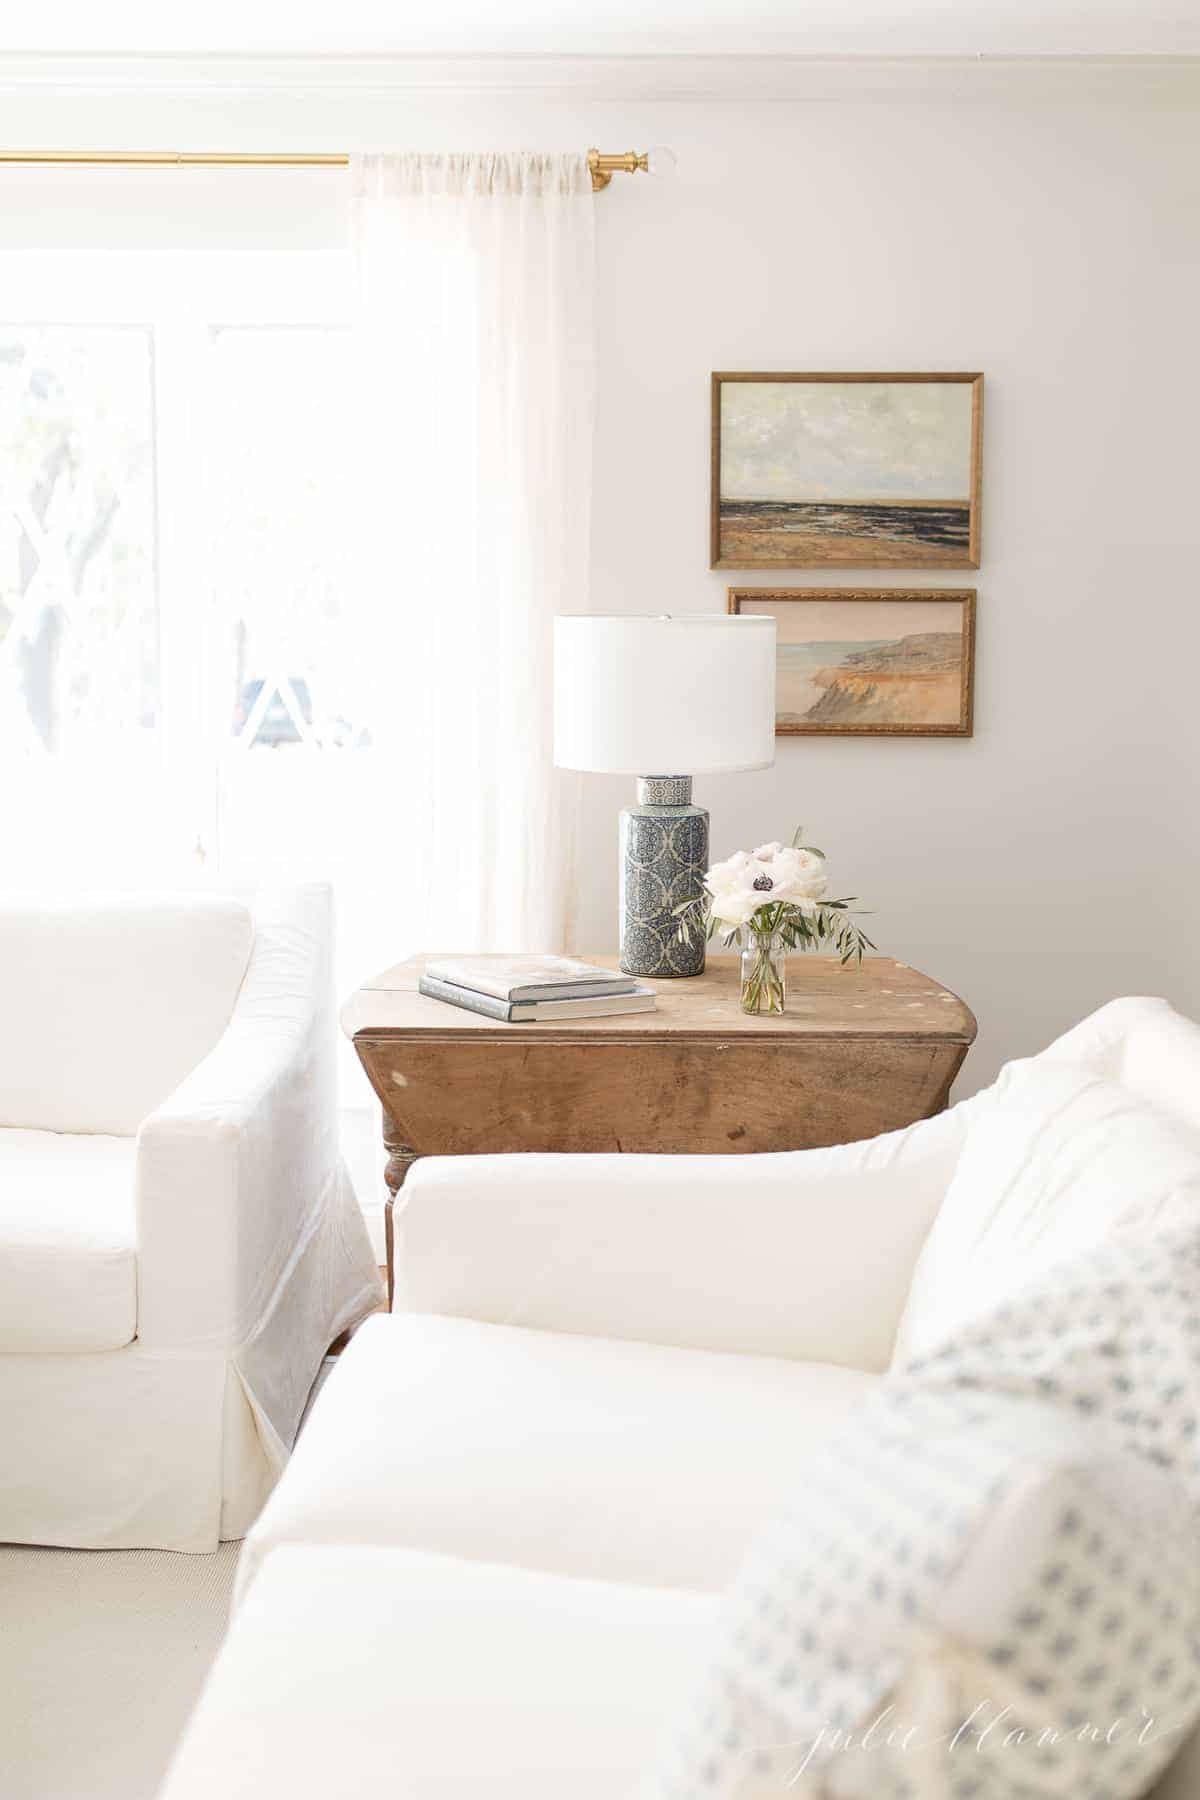 White Pottery Barn slipcovered sofas, antique wooden table with a blue lamp and simple decor in a living room.